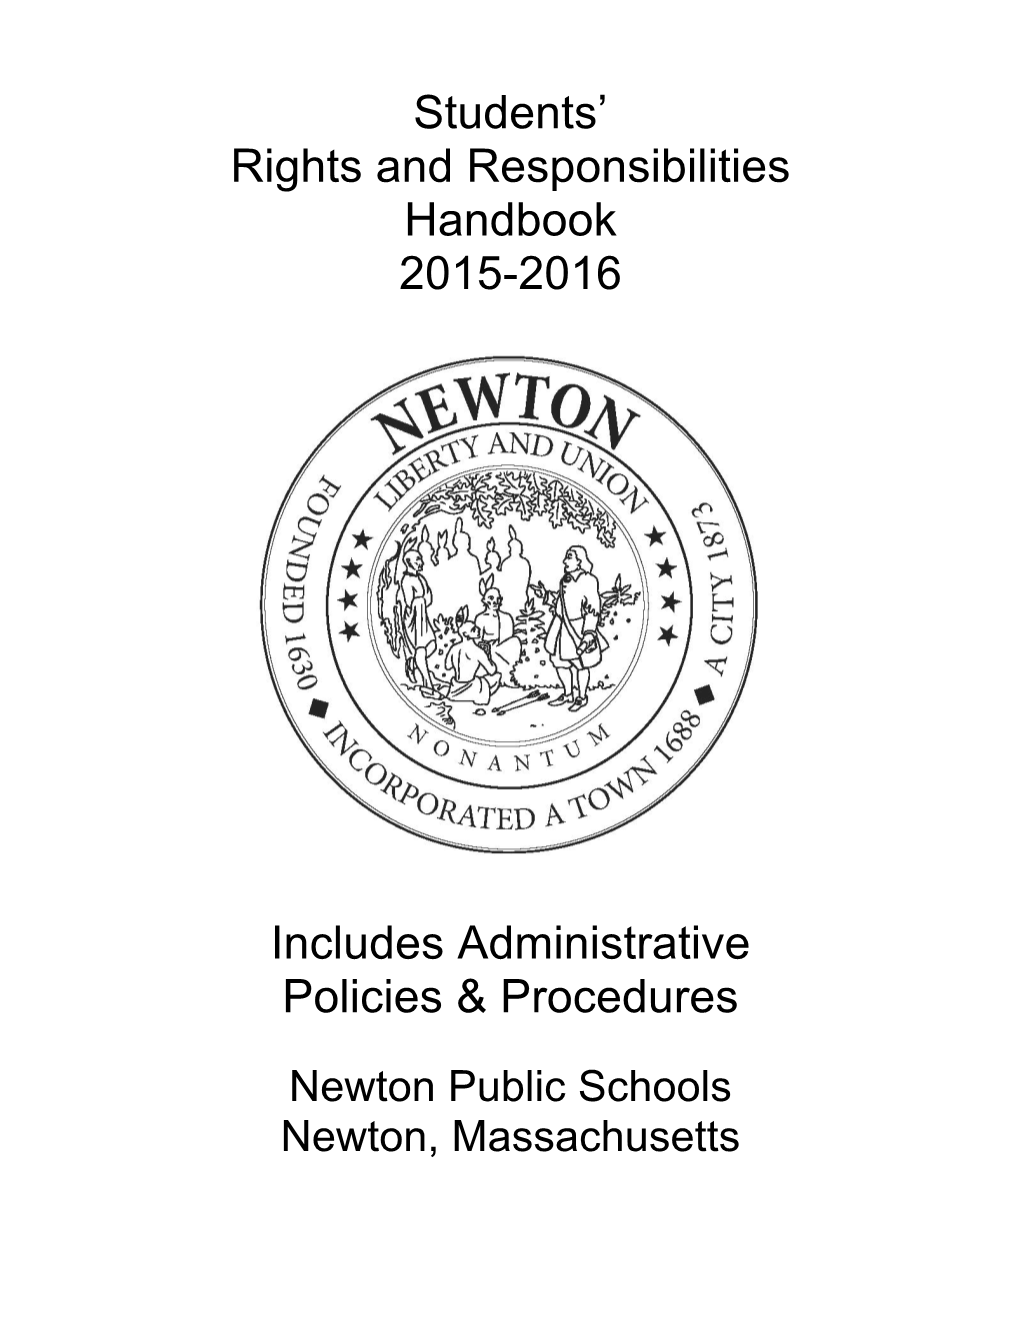 Students' Rights and Responsibilities Handbook 2015-2016 Includes